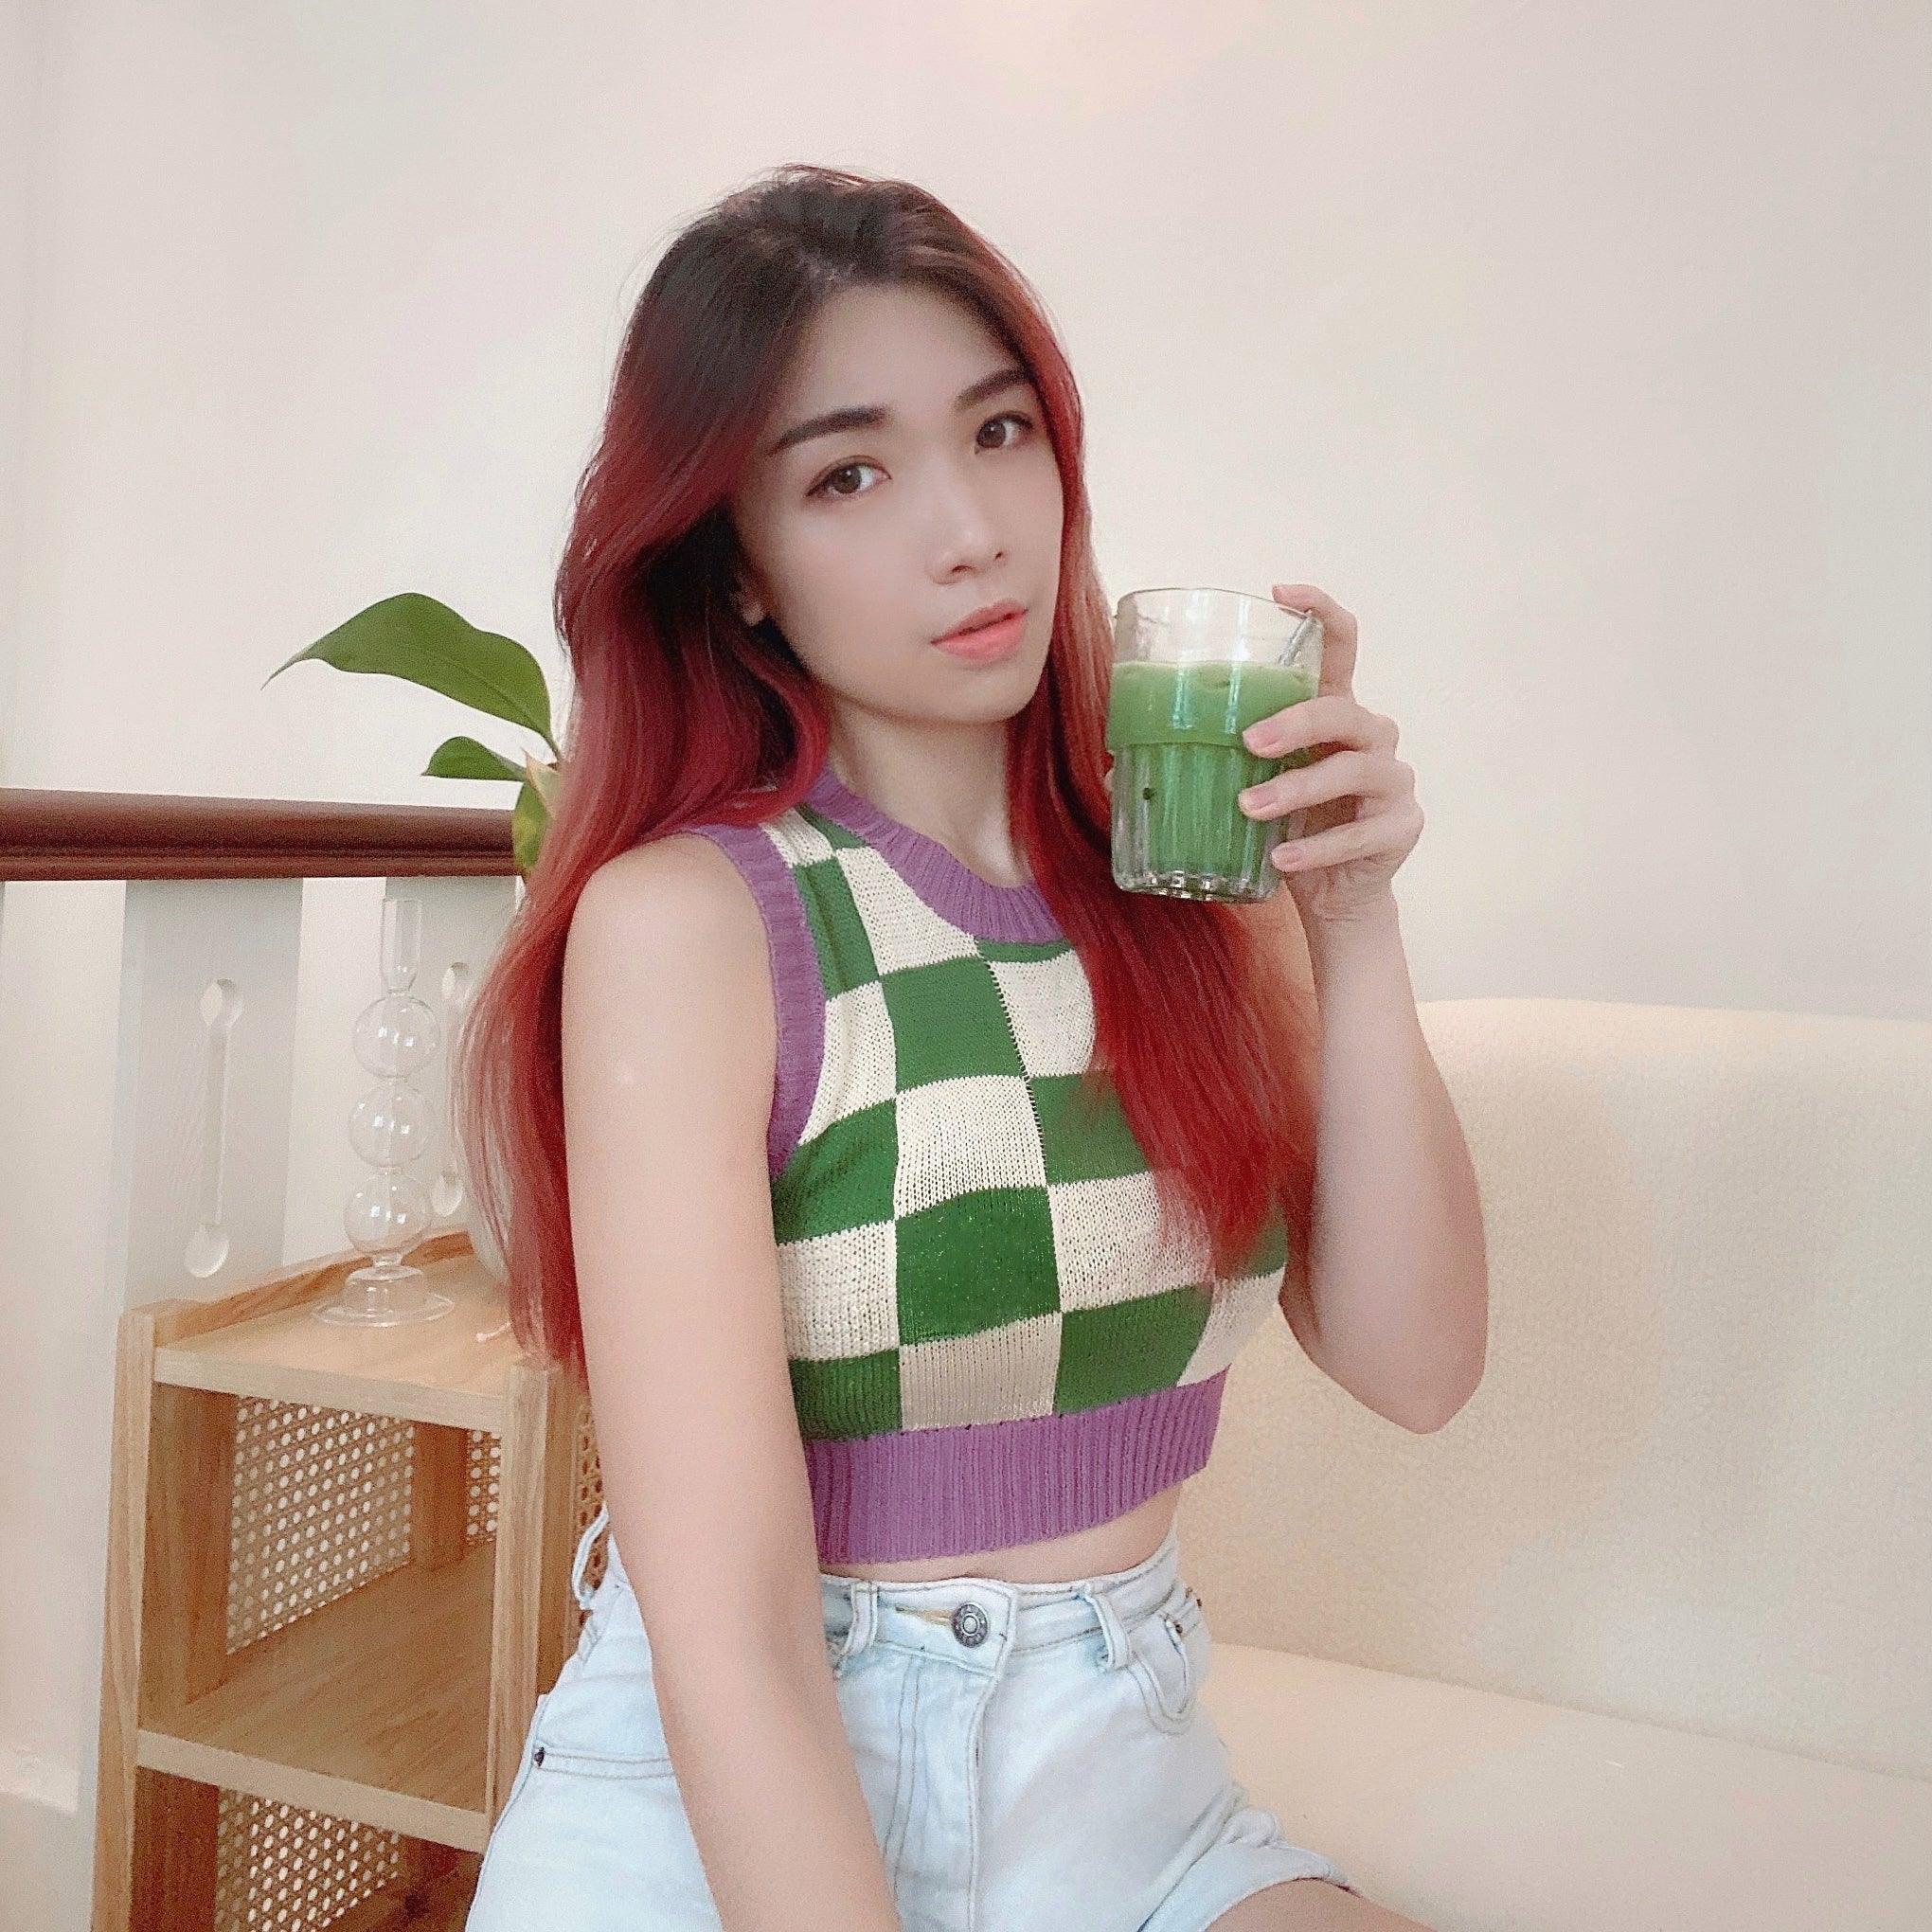 Korean Greenpy Sleeveless Knitted Top - Hearts & Kisses Fashion Boutique - Online Fashion Malaysia - Dress, Tops, Pants, Rompers, Sportswear & more. We Ship To Malaysia & Singapore